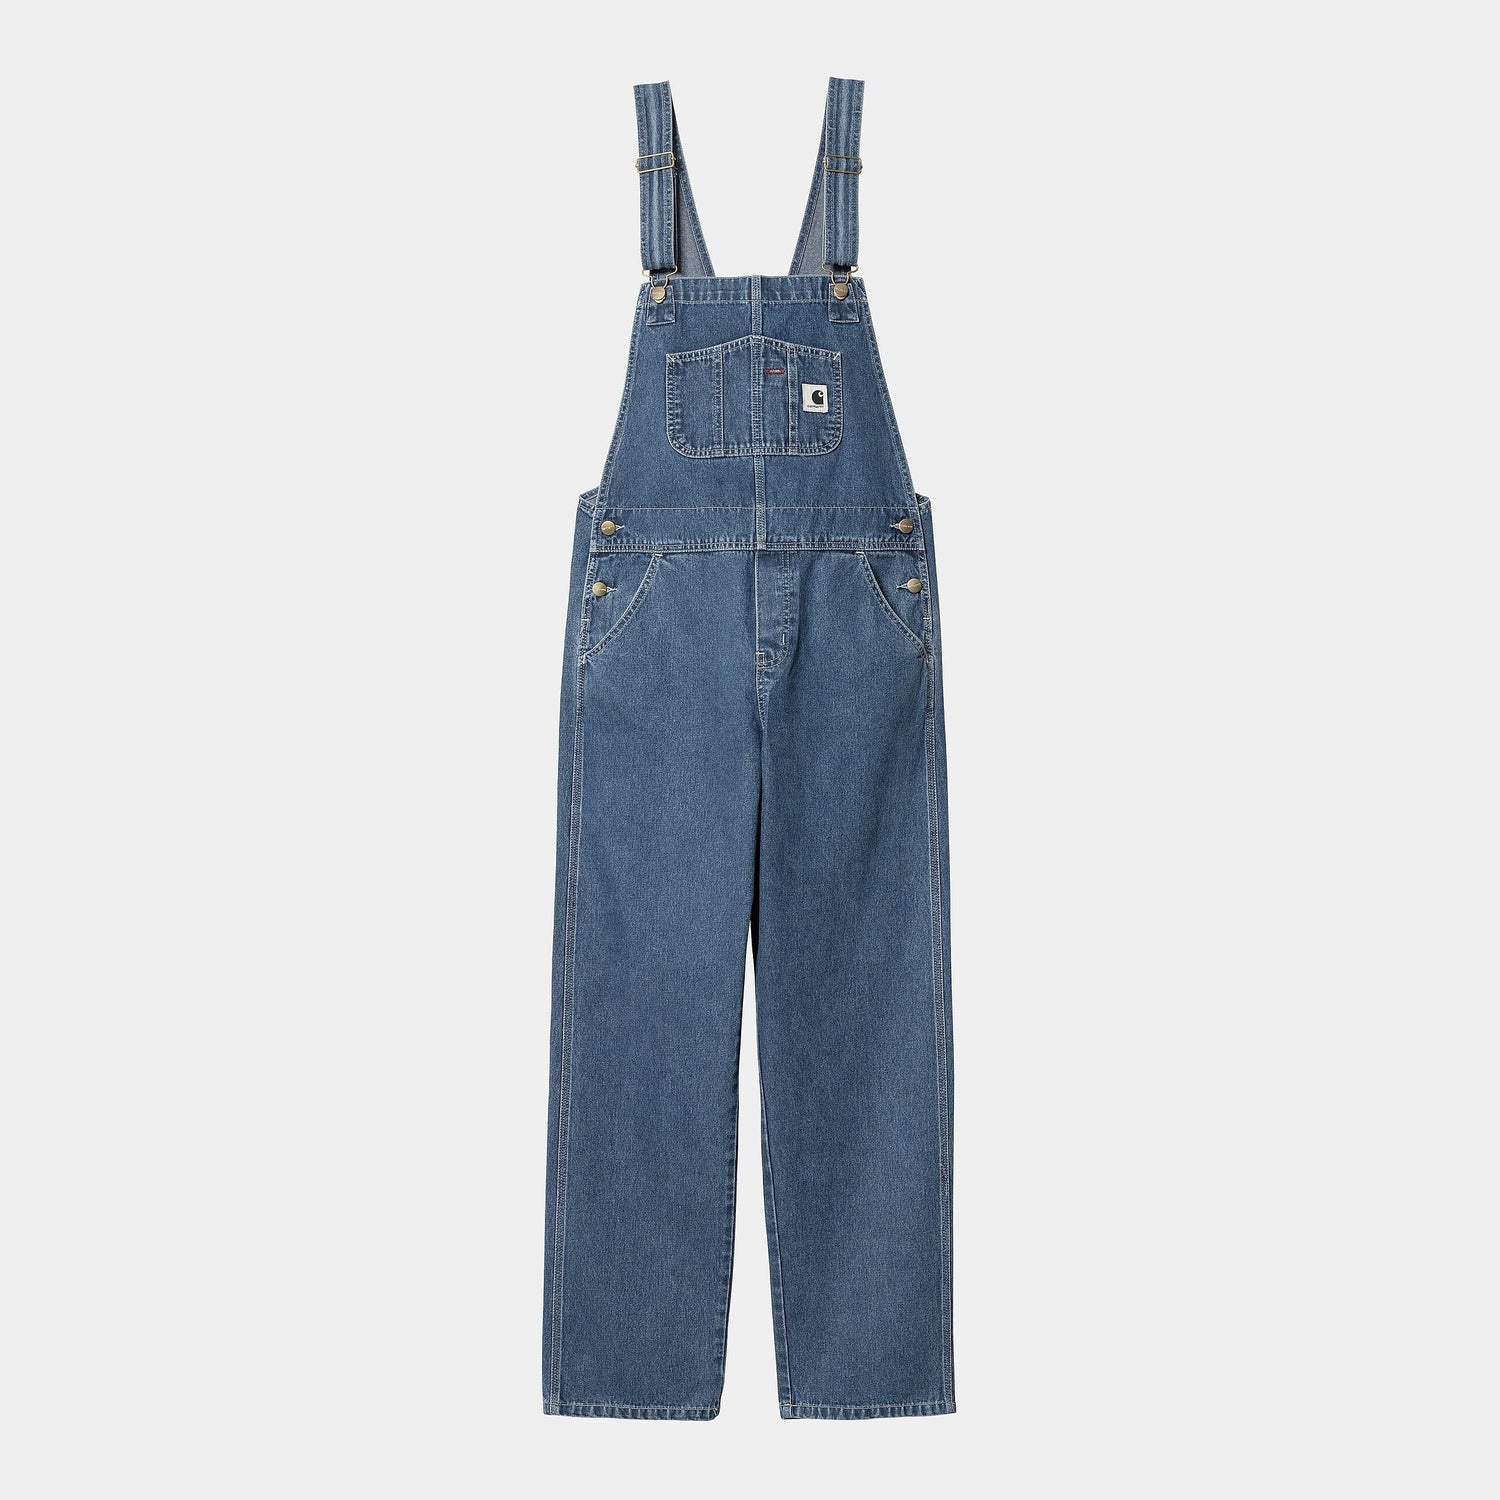 BIB OVERALL IN BLUE STONE WASHED OVERALL CARHARTT 